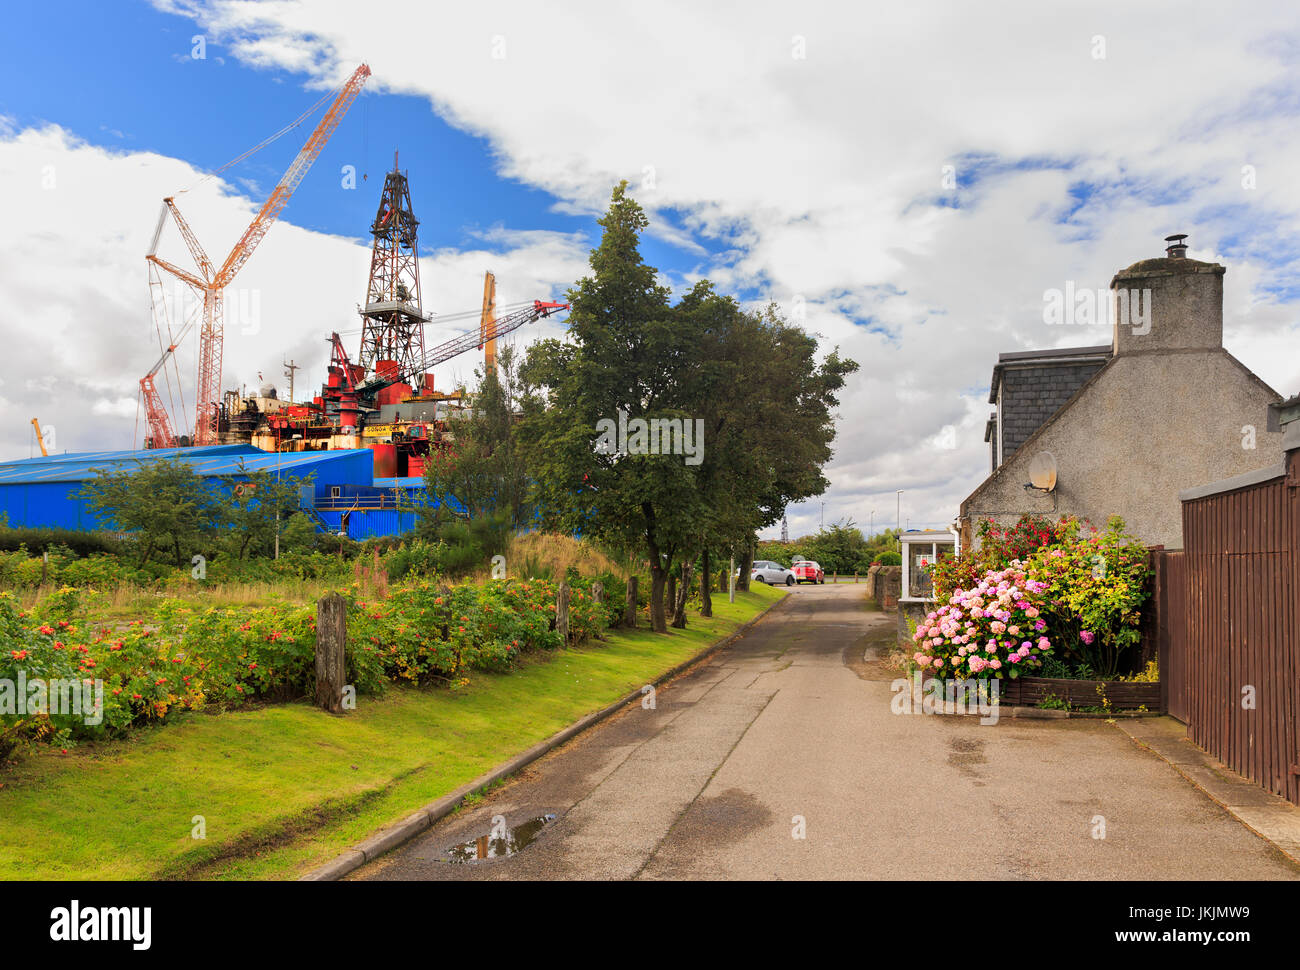 Invergordon typical detached house, nice view, industrial area with oil rig fabrication in the background. Stock Photo